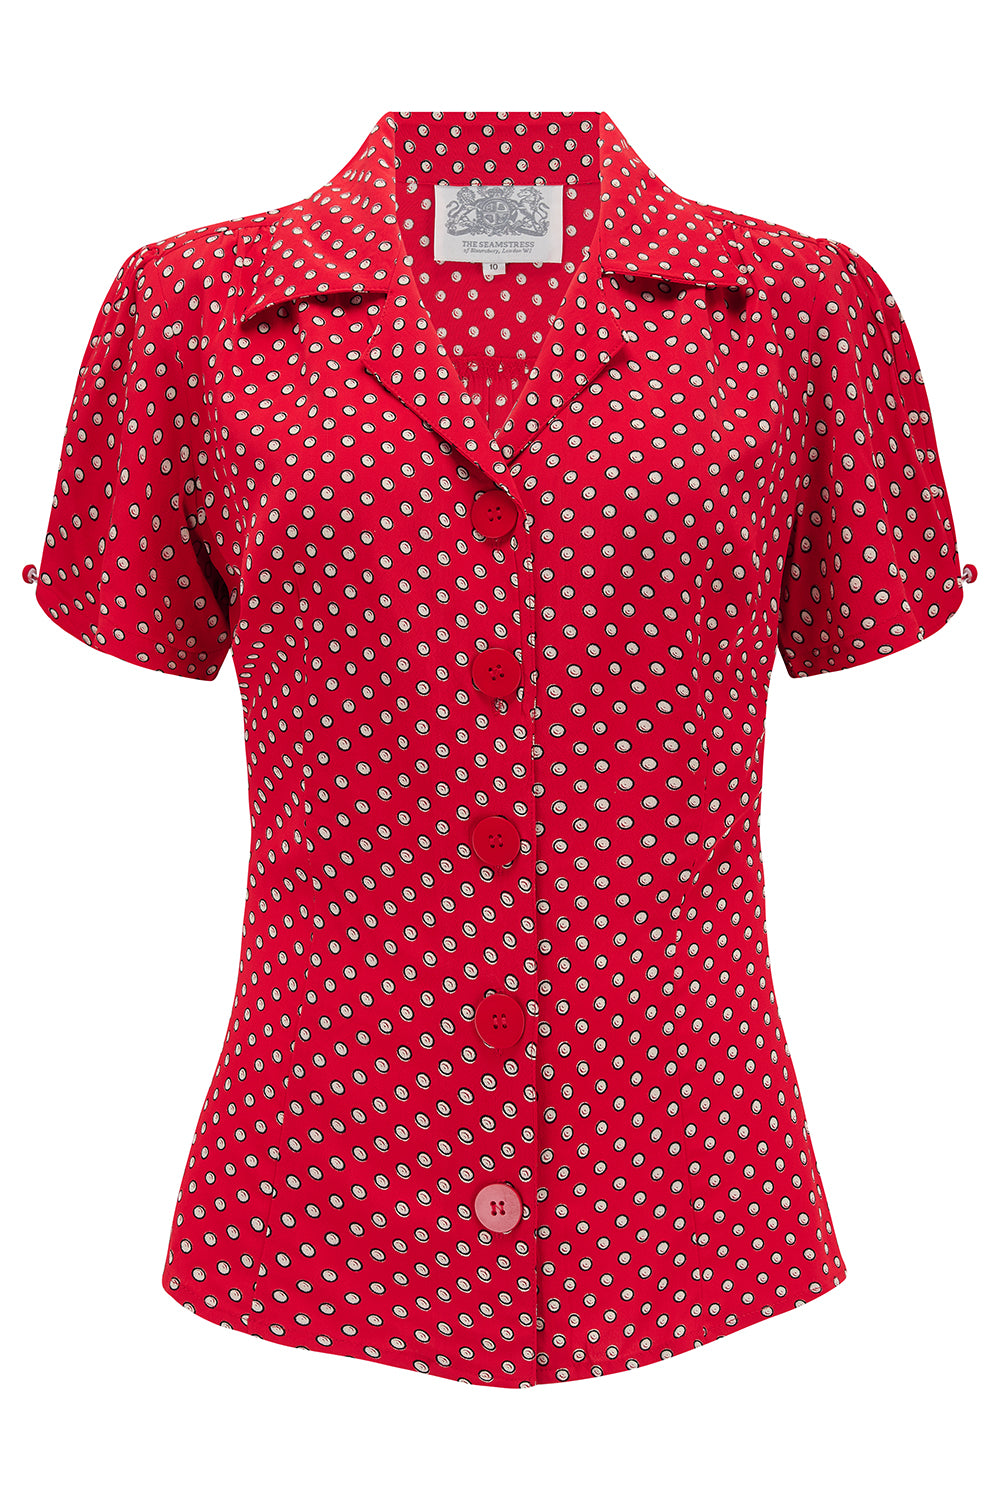 "Grace" Blouse in Red Ditzy Print CC41, Authentic & Classic 1940s Vintage Style - CC41, Goodwood Revival, Twinwood Festival, Viva Las Vegas Rockabilly Weekend Rock n Romance The Seamstress Of Bloomsbury